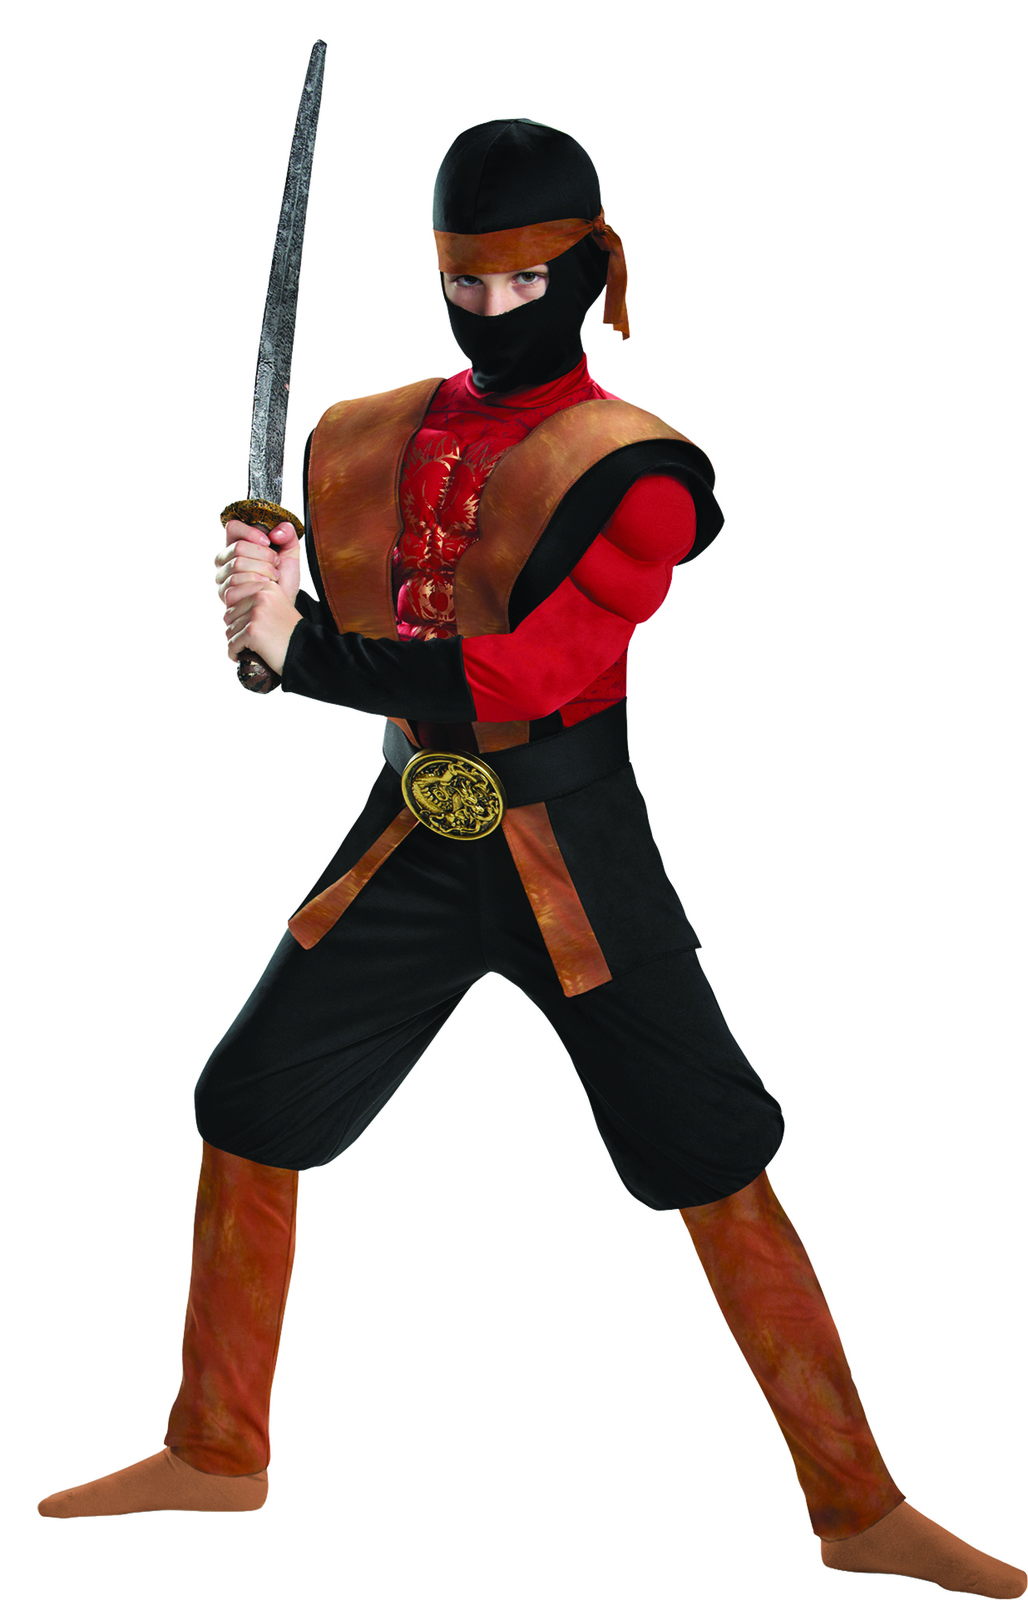 Primary image for Ninja Warrior Muscle Costume, Large (10-12)